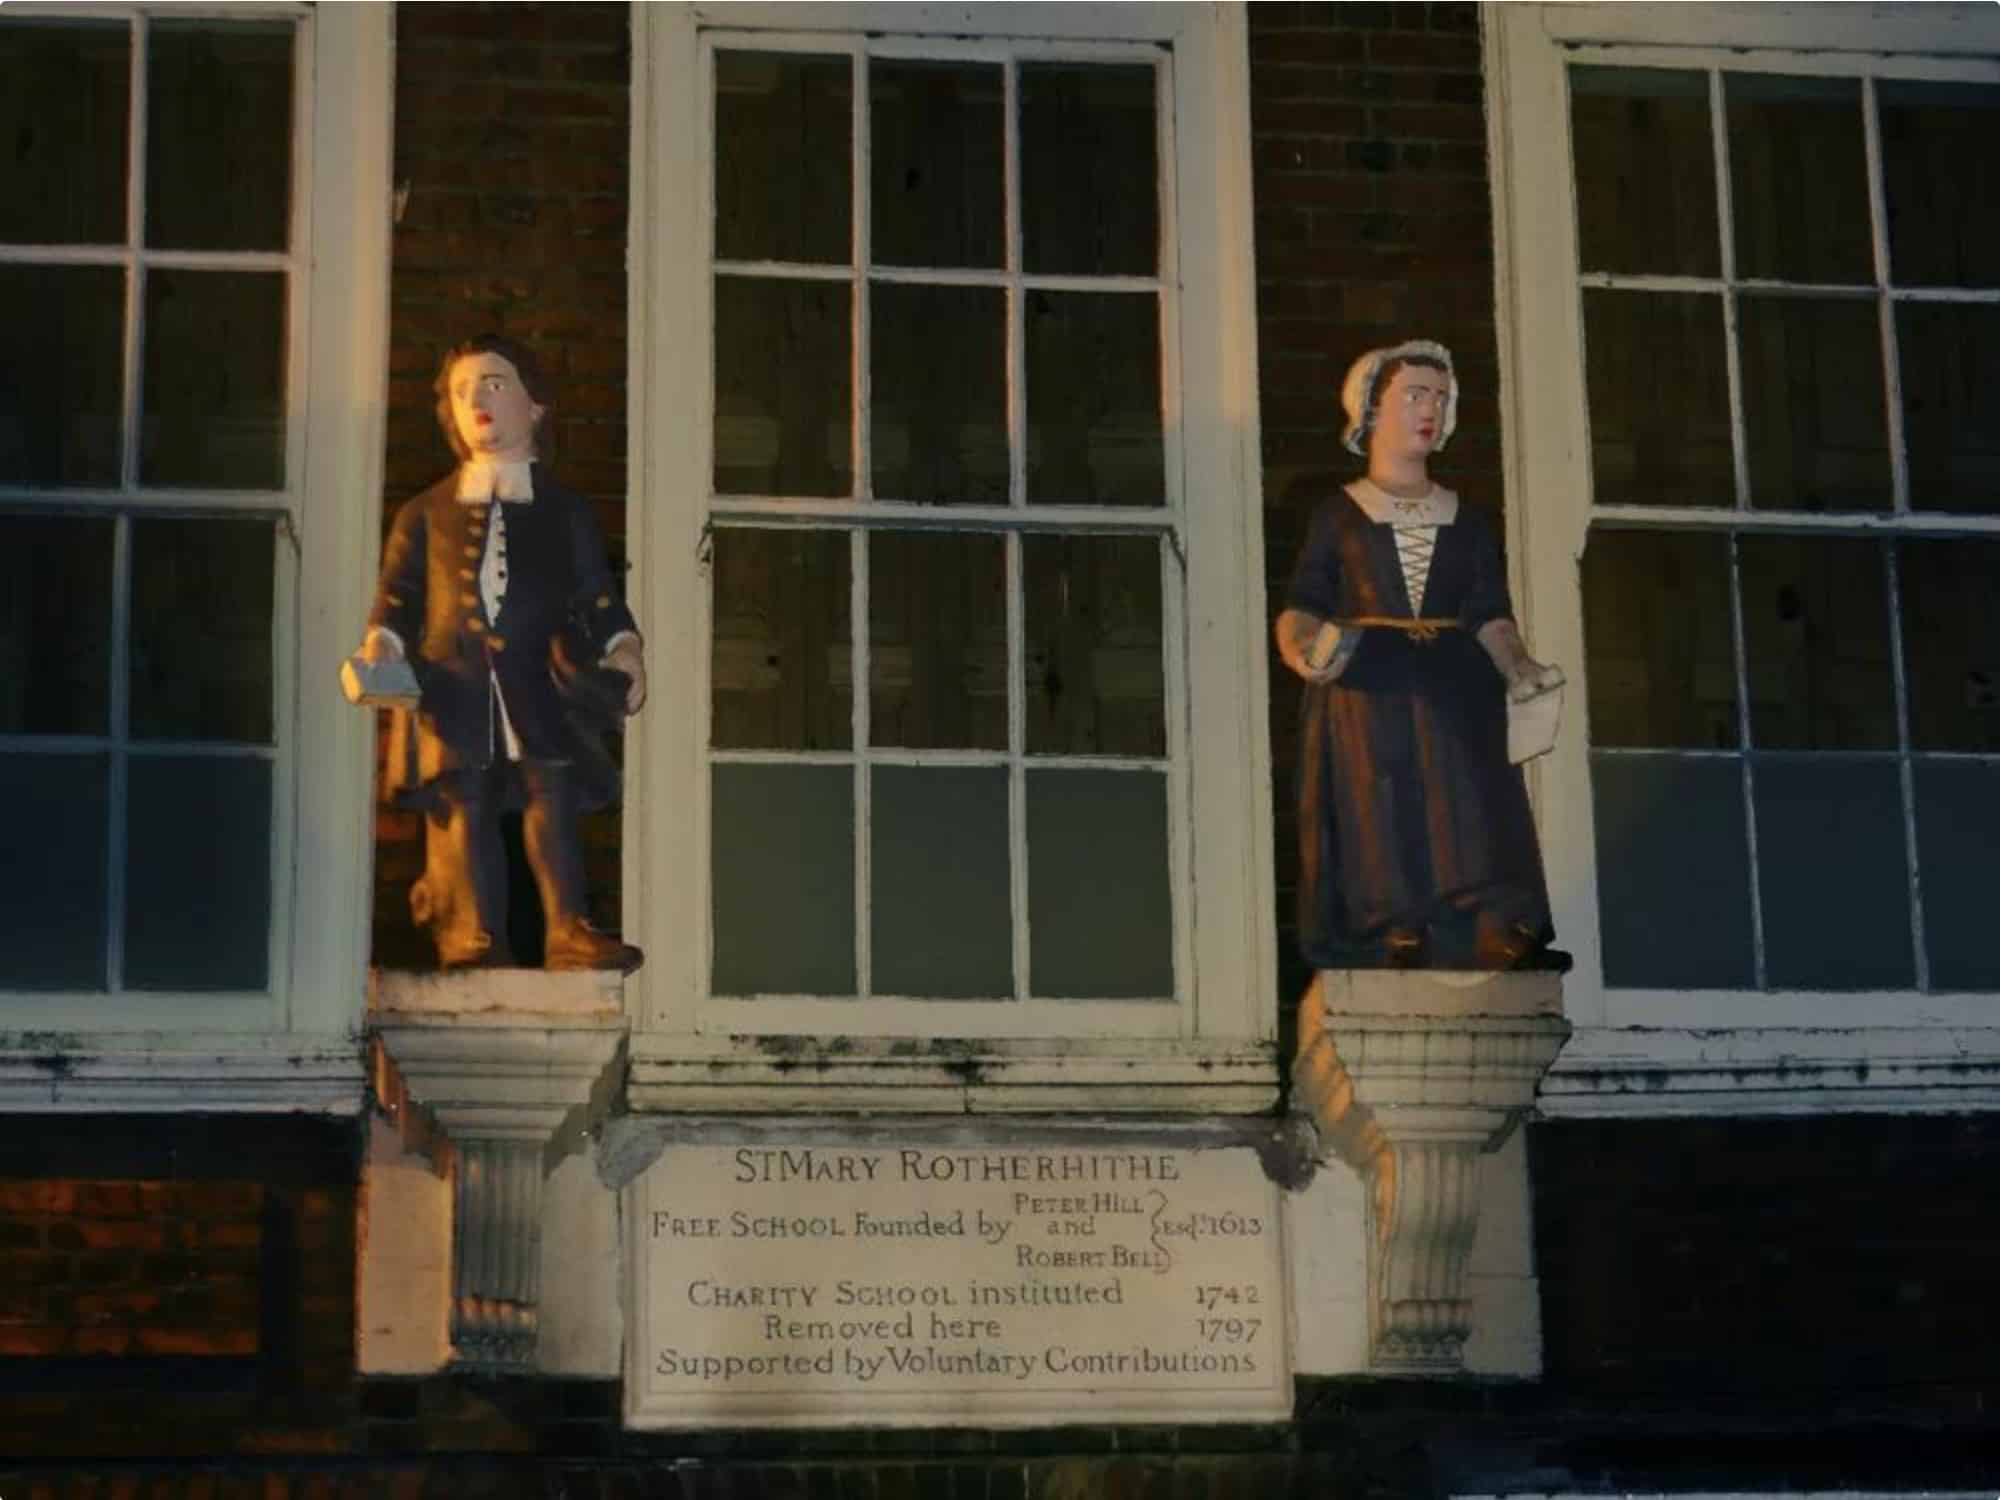 The two figurines on the Old Schoolhouse building opposite St Mary's Church, Rotherhithe